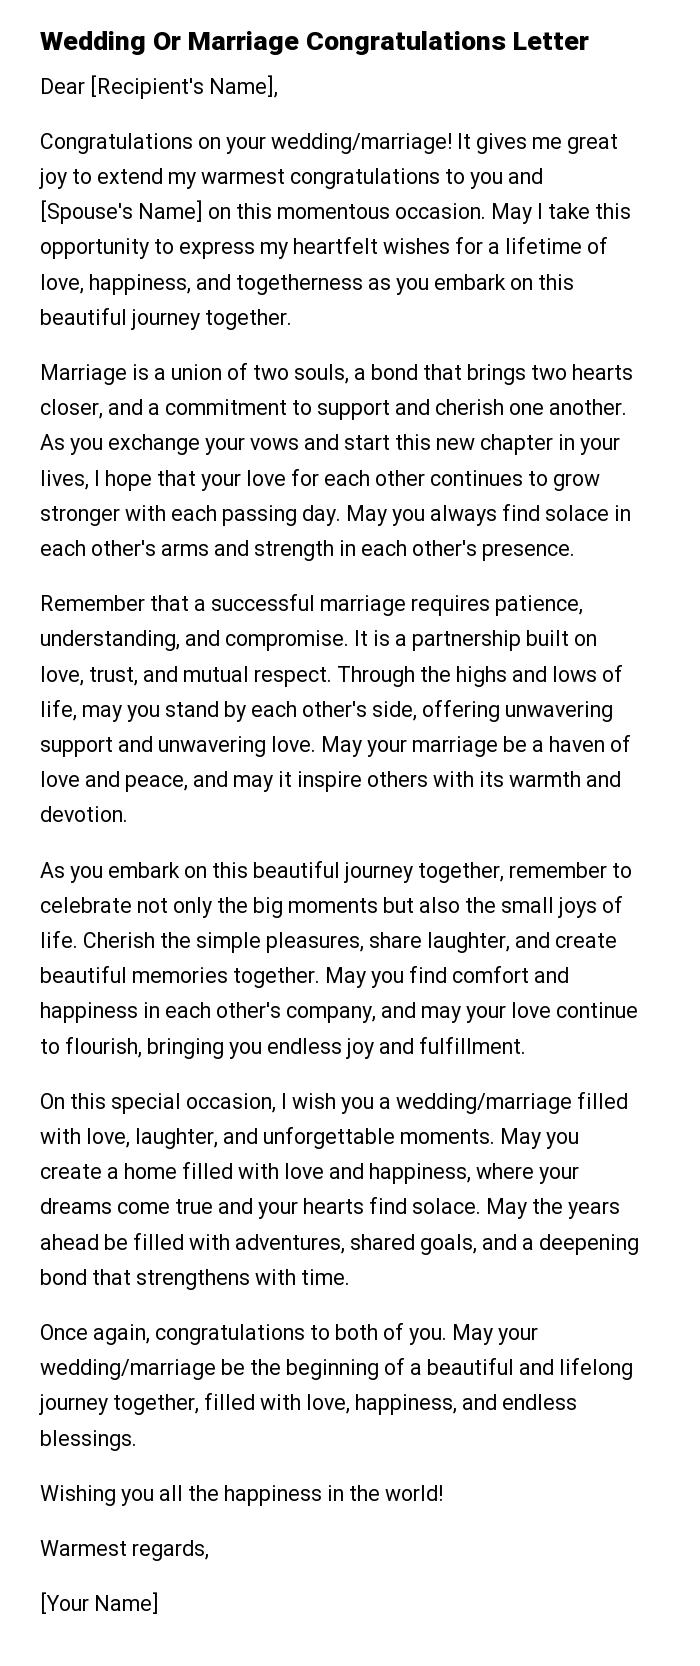 Wedding Or Marriage Congratulations Letter